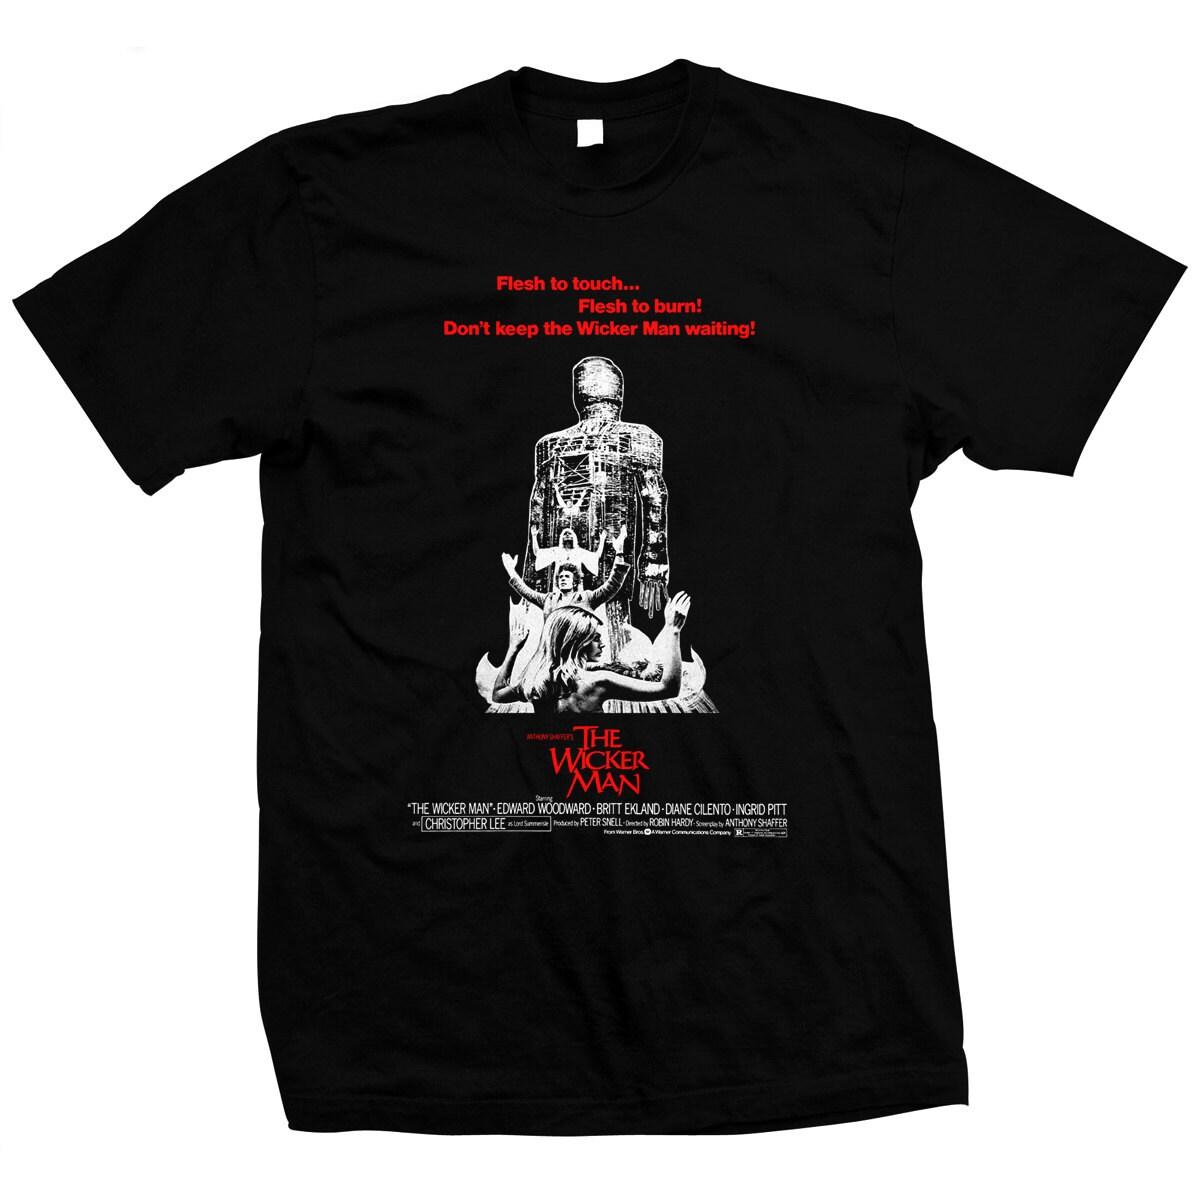 The Wicker Man Movie Poster T-shirt Gift For Horror Fans